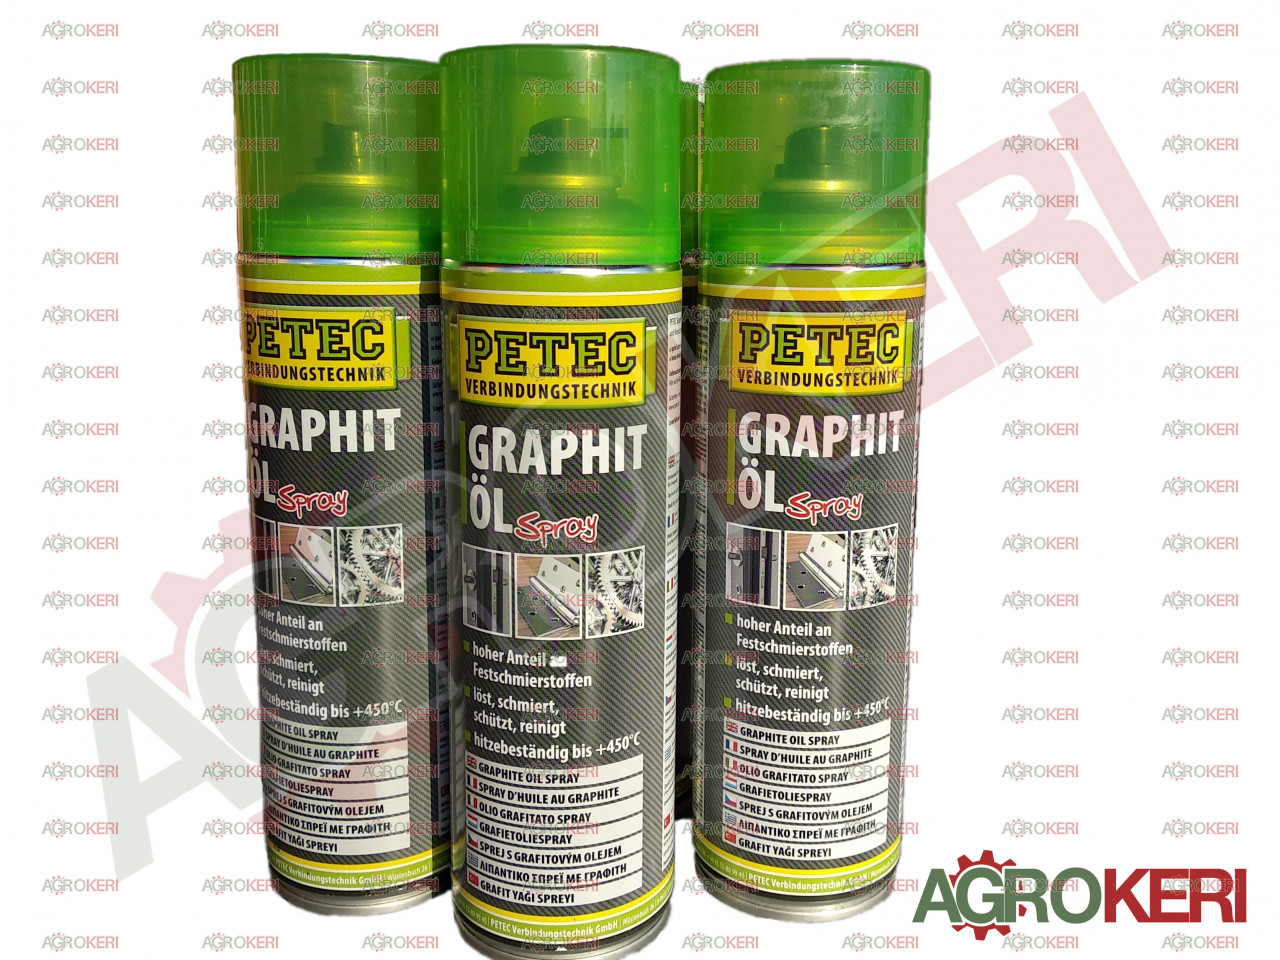 https://www.agrokeri.hu/images/products/001318-02.jpg?t=1&f=ws&w=1280